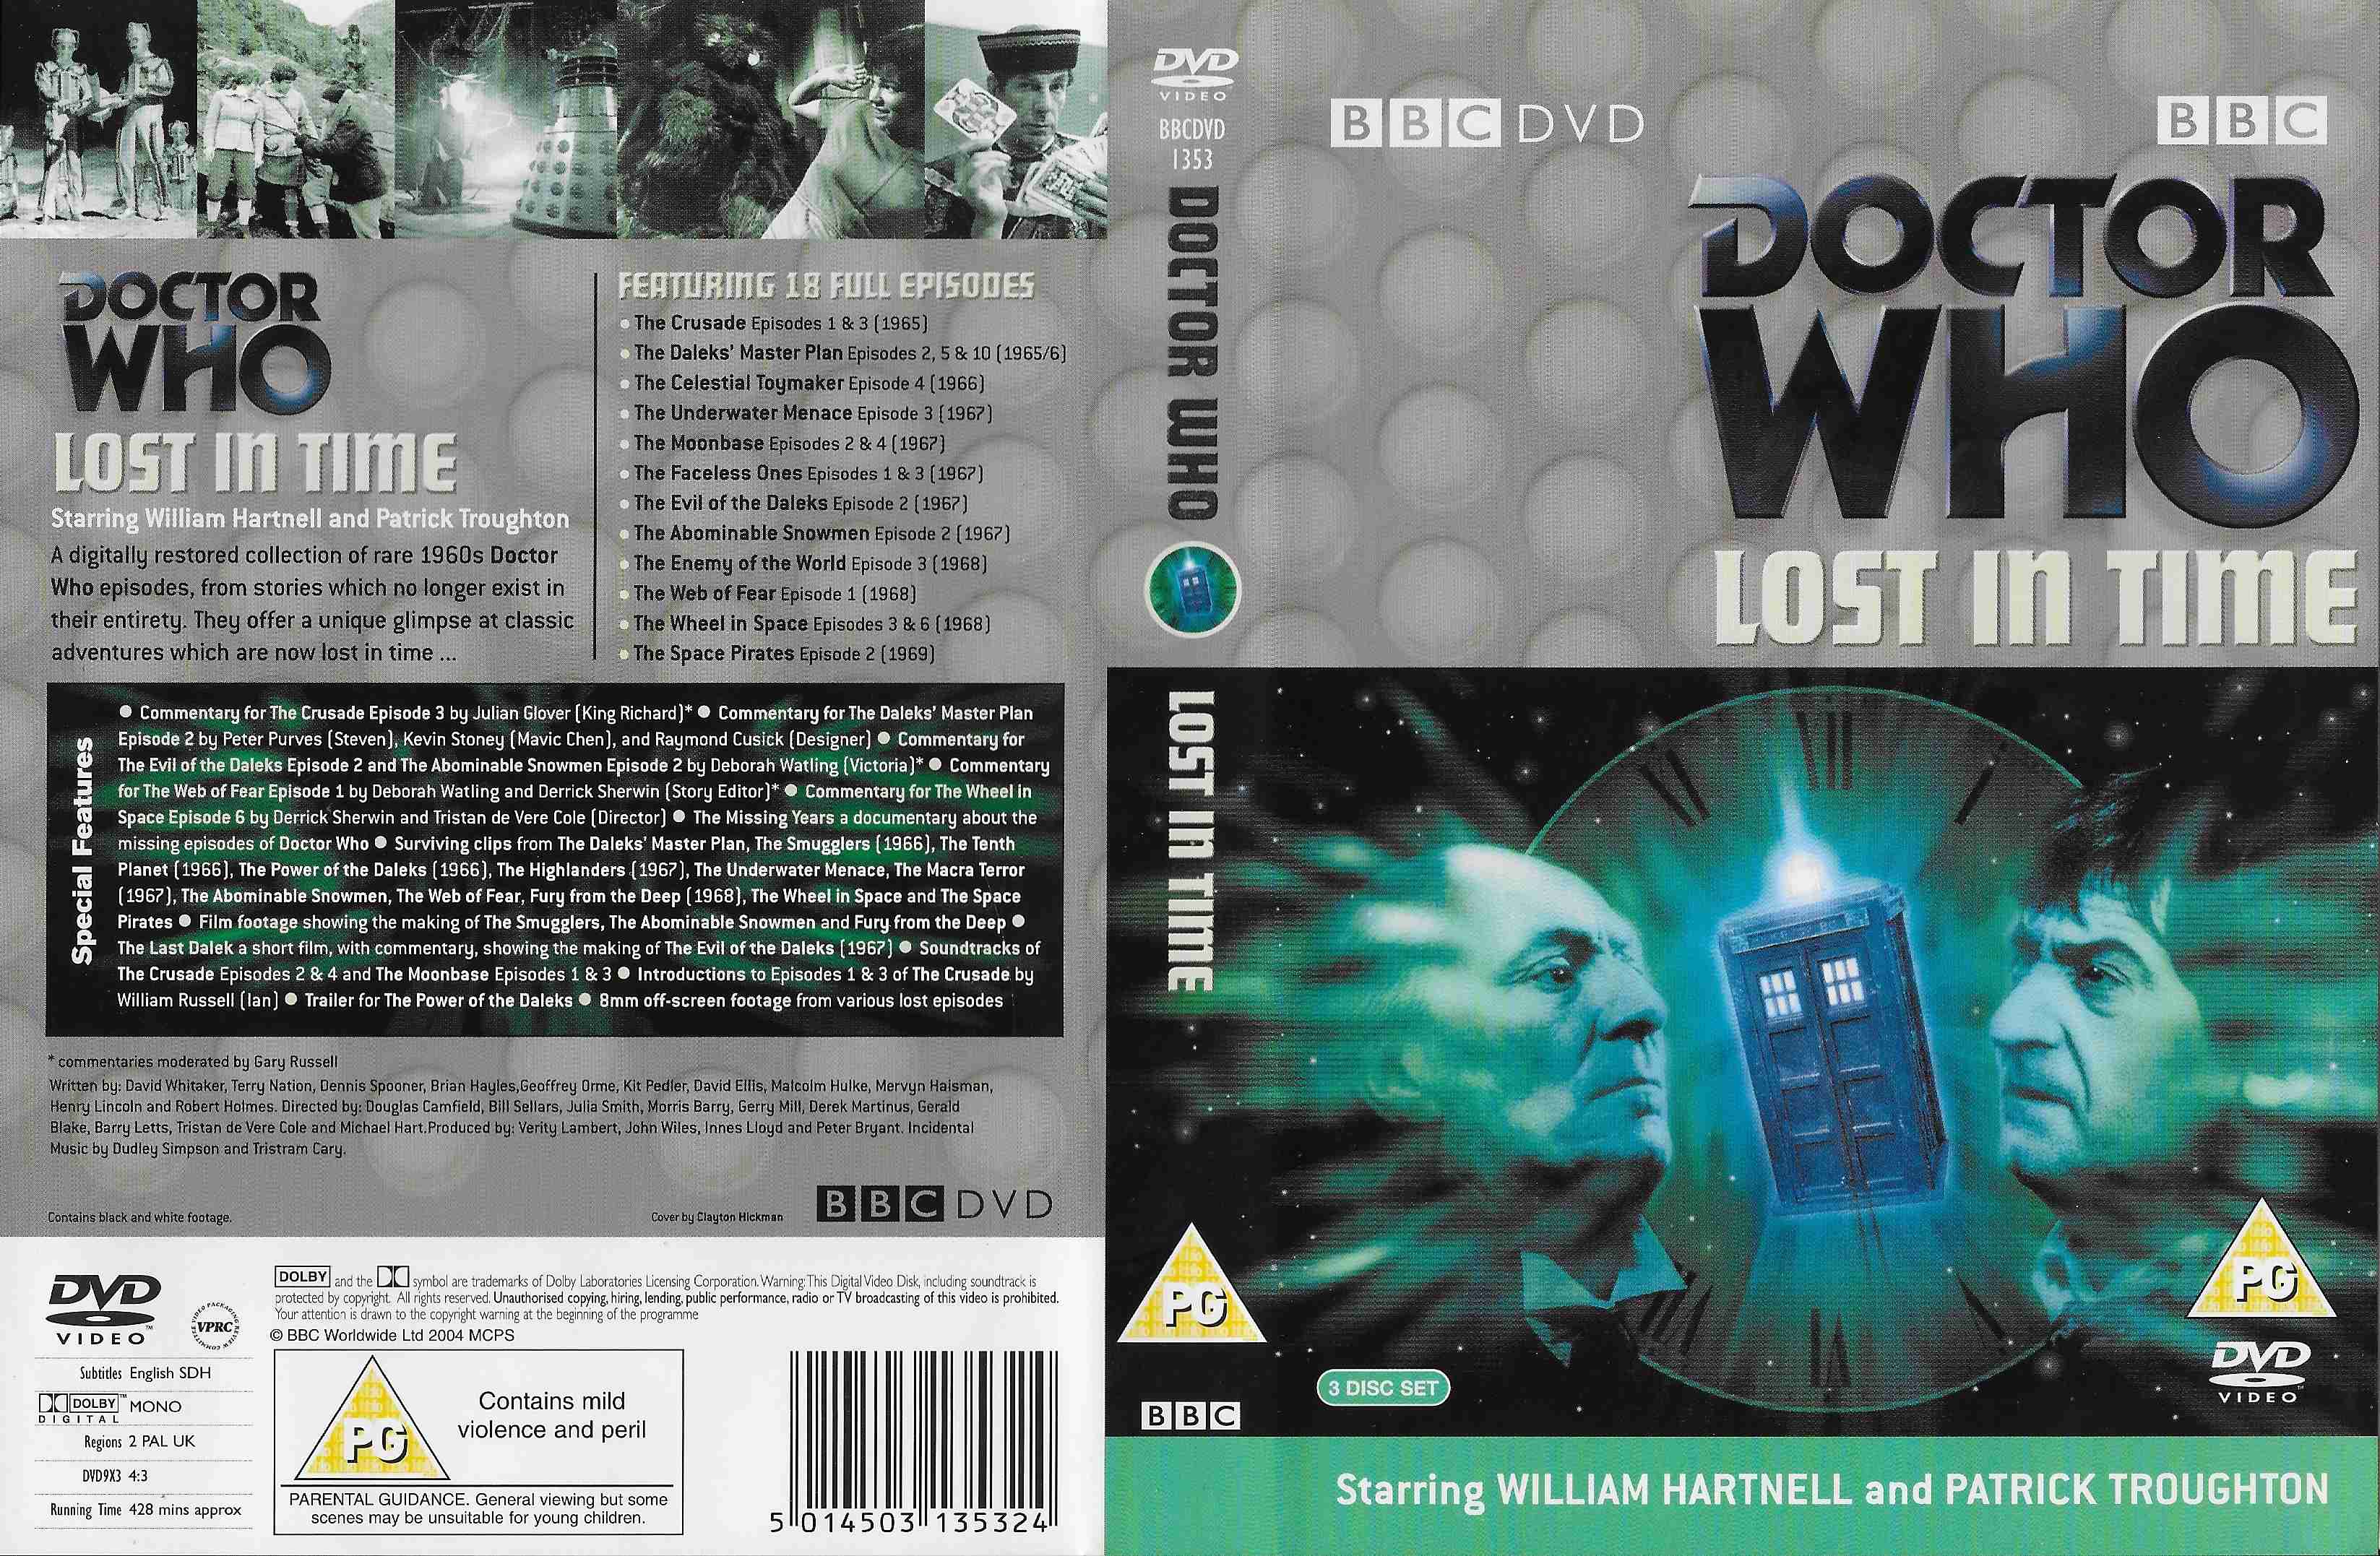 Picture of BBCDVD 1353 Doctor Who - Lost in time by artist Various from the BBC records and Tapes library